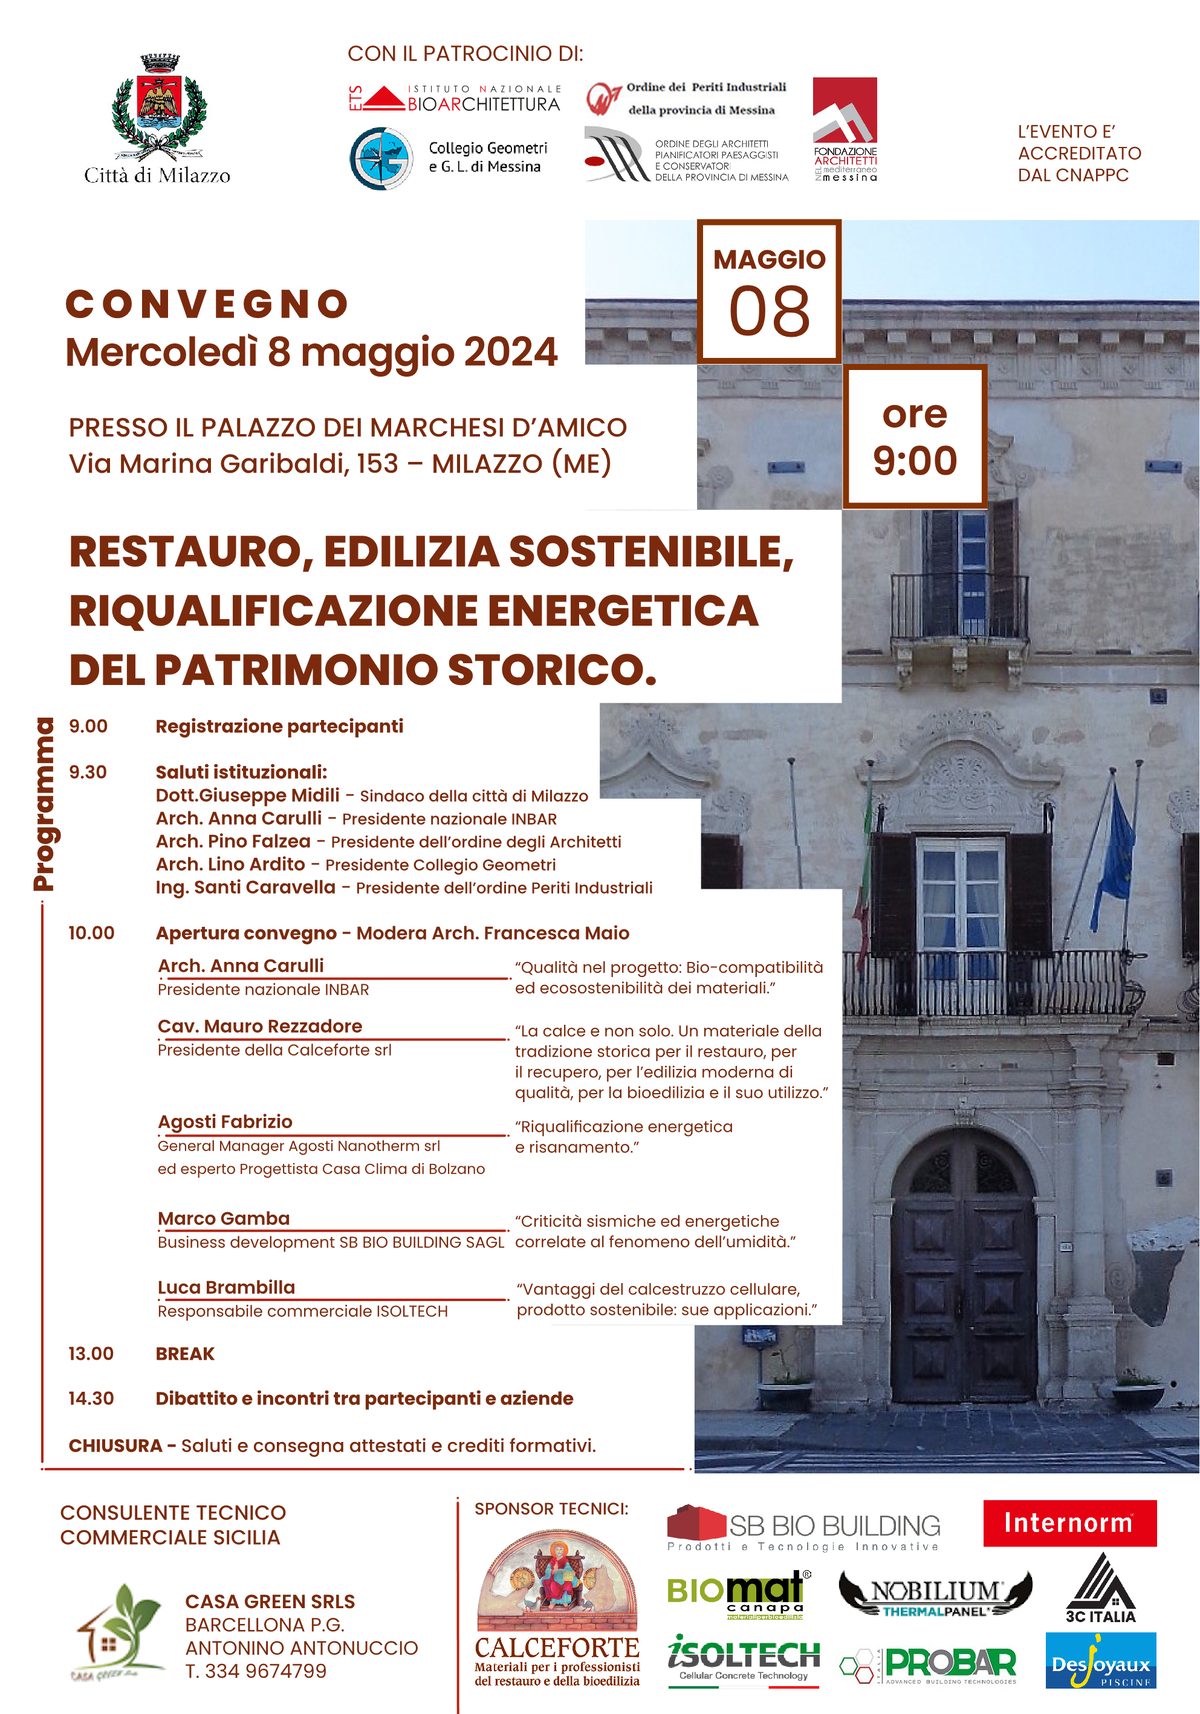 Invitation to the Conference: Sustainability of Interventions in Construction